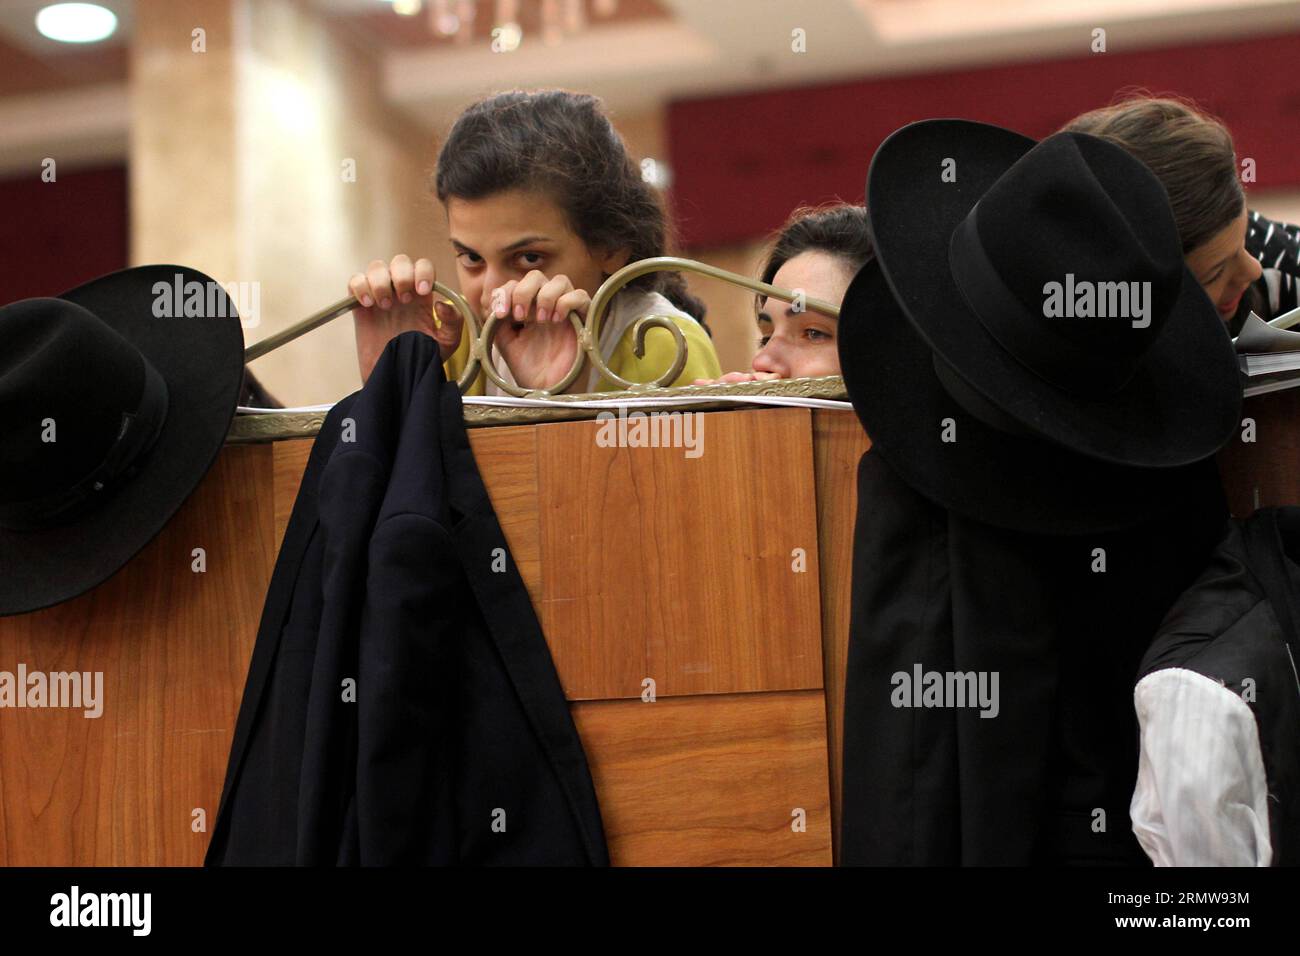 (141013) -- JERUSALEM, Oct. 13, 2014 -- Two Jewish girls peek Ultra-orthodox Jews dancing as they mark the ancient custom Simchat Beit Hashoeva in Bnei Brak near Tel Aviv on Oct. 13, 2014. Simchat Beit Hashoeva or the joy of drawing is a commemoration and fulfilment of the Muitzvah to rejoice during the week-long holiday of Sukkot which started last Wednesday.) ISRAEL-JERUSALEM-UNTRA ORTHODOX-DANCE-SUKKOT GilxCohen PUBLICATIONxNOTxINxCHN   Jerusalem OCT 13 2014 Two Jewish Girls Peek Ultra Orthodox Jews Dancing As They Mark The Ancient Custom Simchat Beit  in  Brak Near Tel Aviv ON OCT 13 2014 Stock Photo